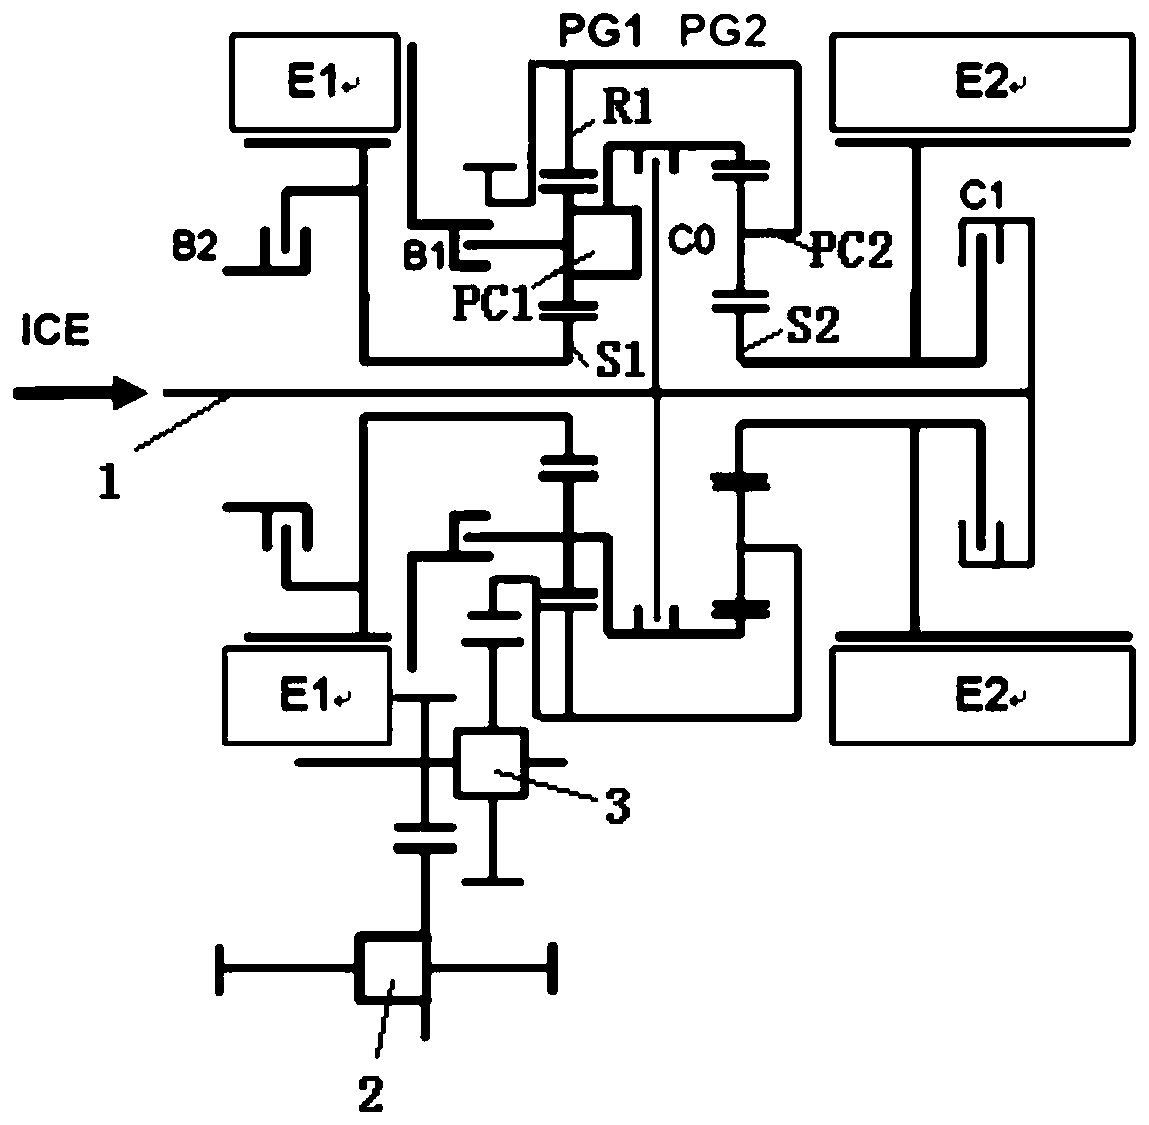 A control method for the coordination between the engine and gear shift of a hybrid electric vehicle with a sliding start